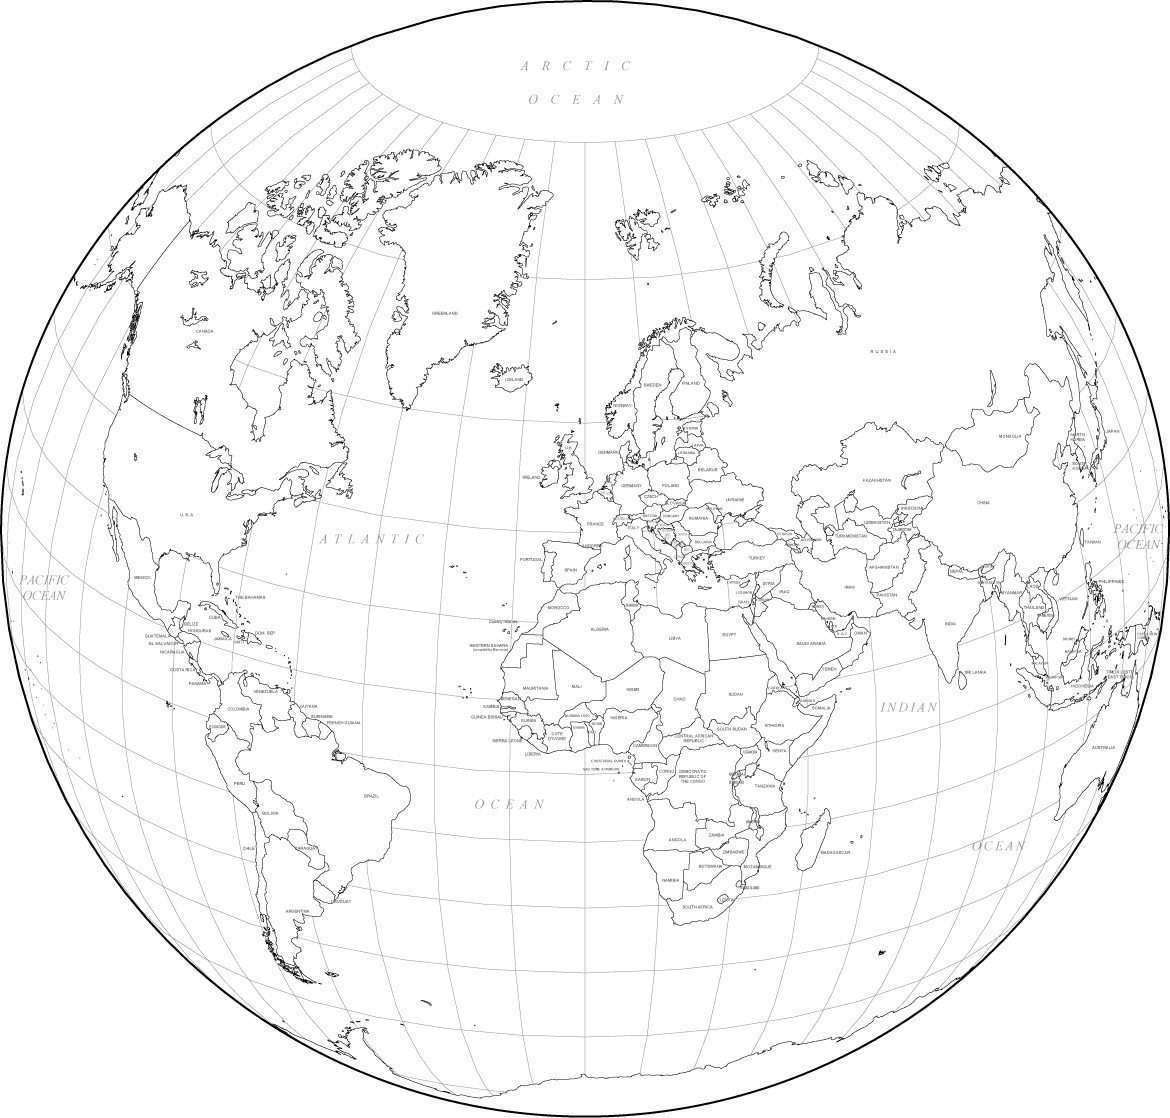 Top 93+ Images map of the world showing countries black and white Full HD, 2k, 4k